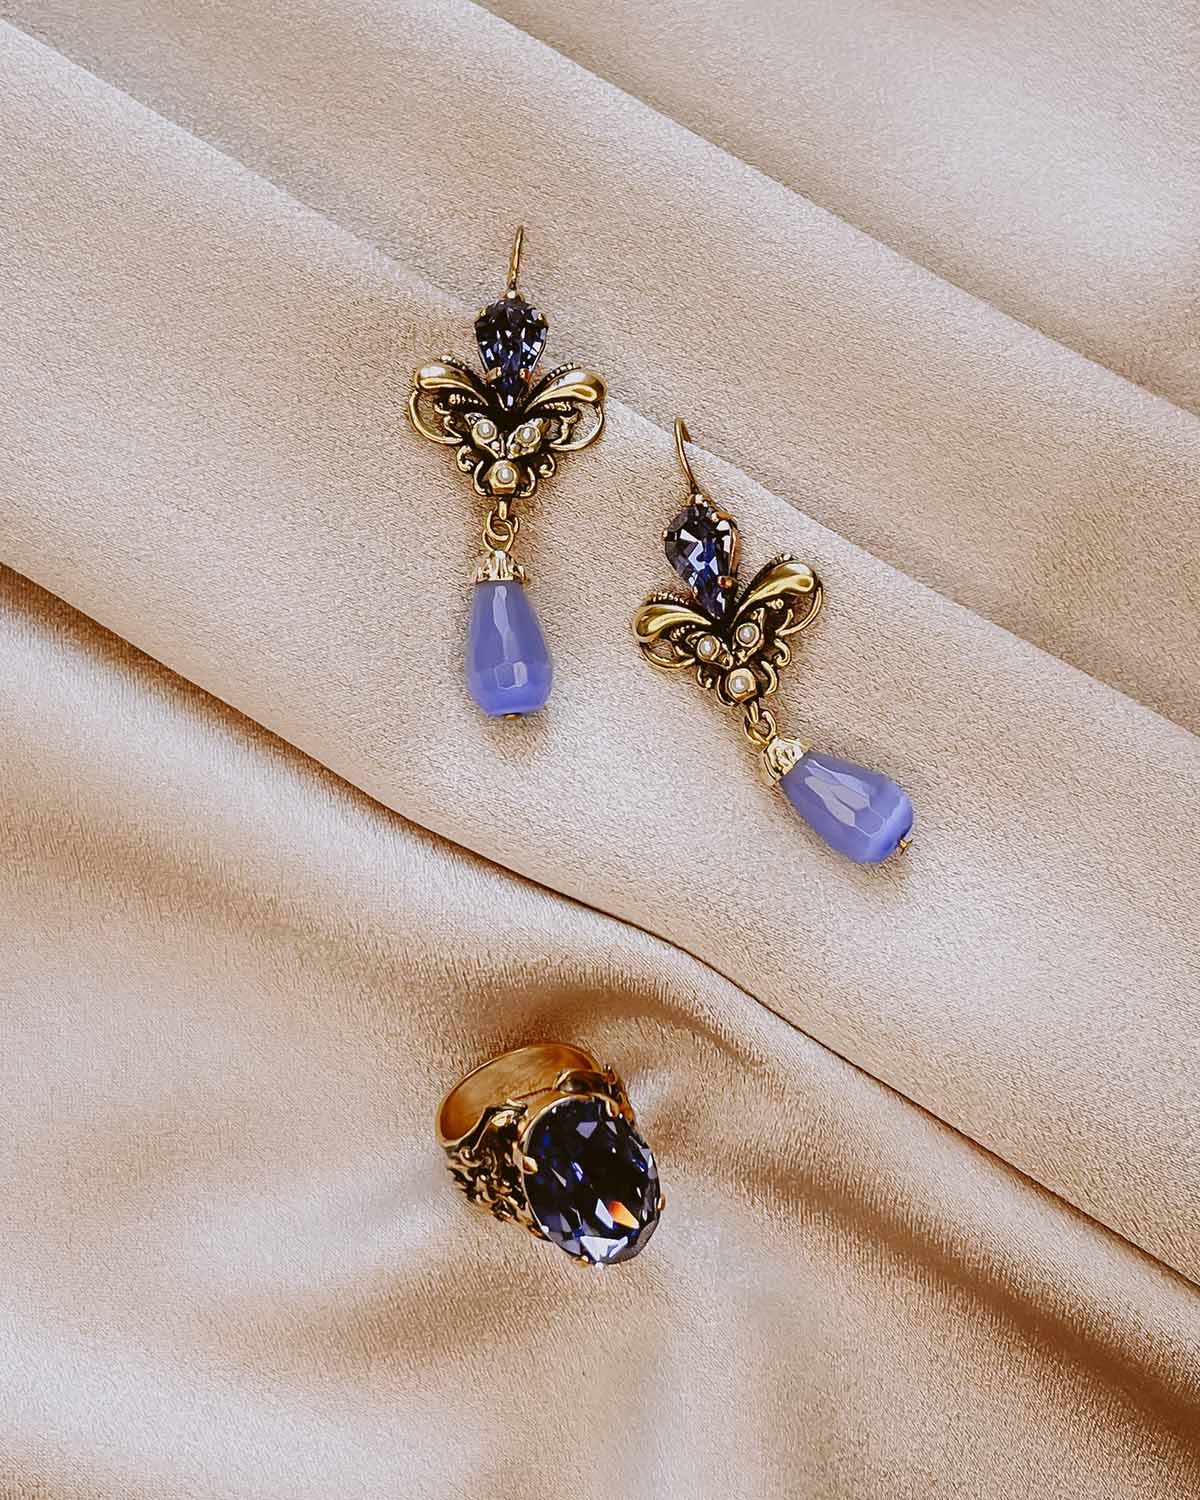 The Firenze Earrings (Tuscan Glimmer Edition)